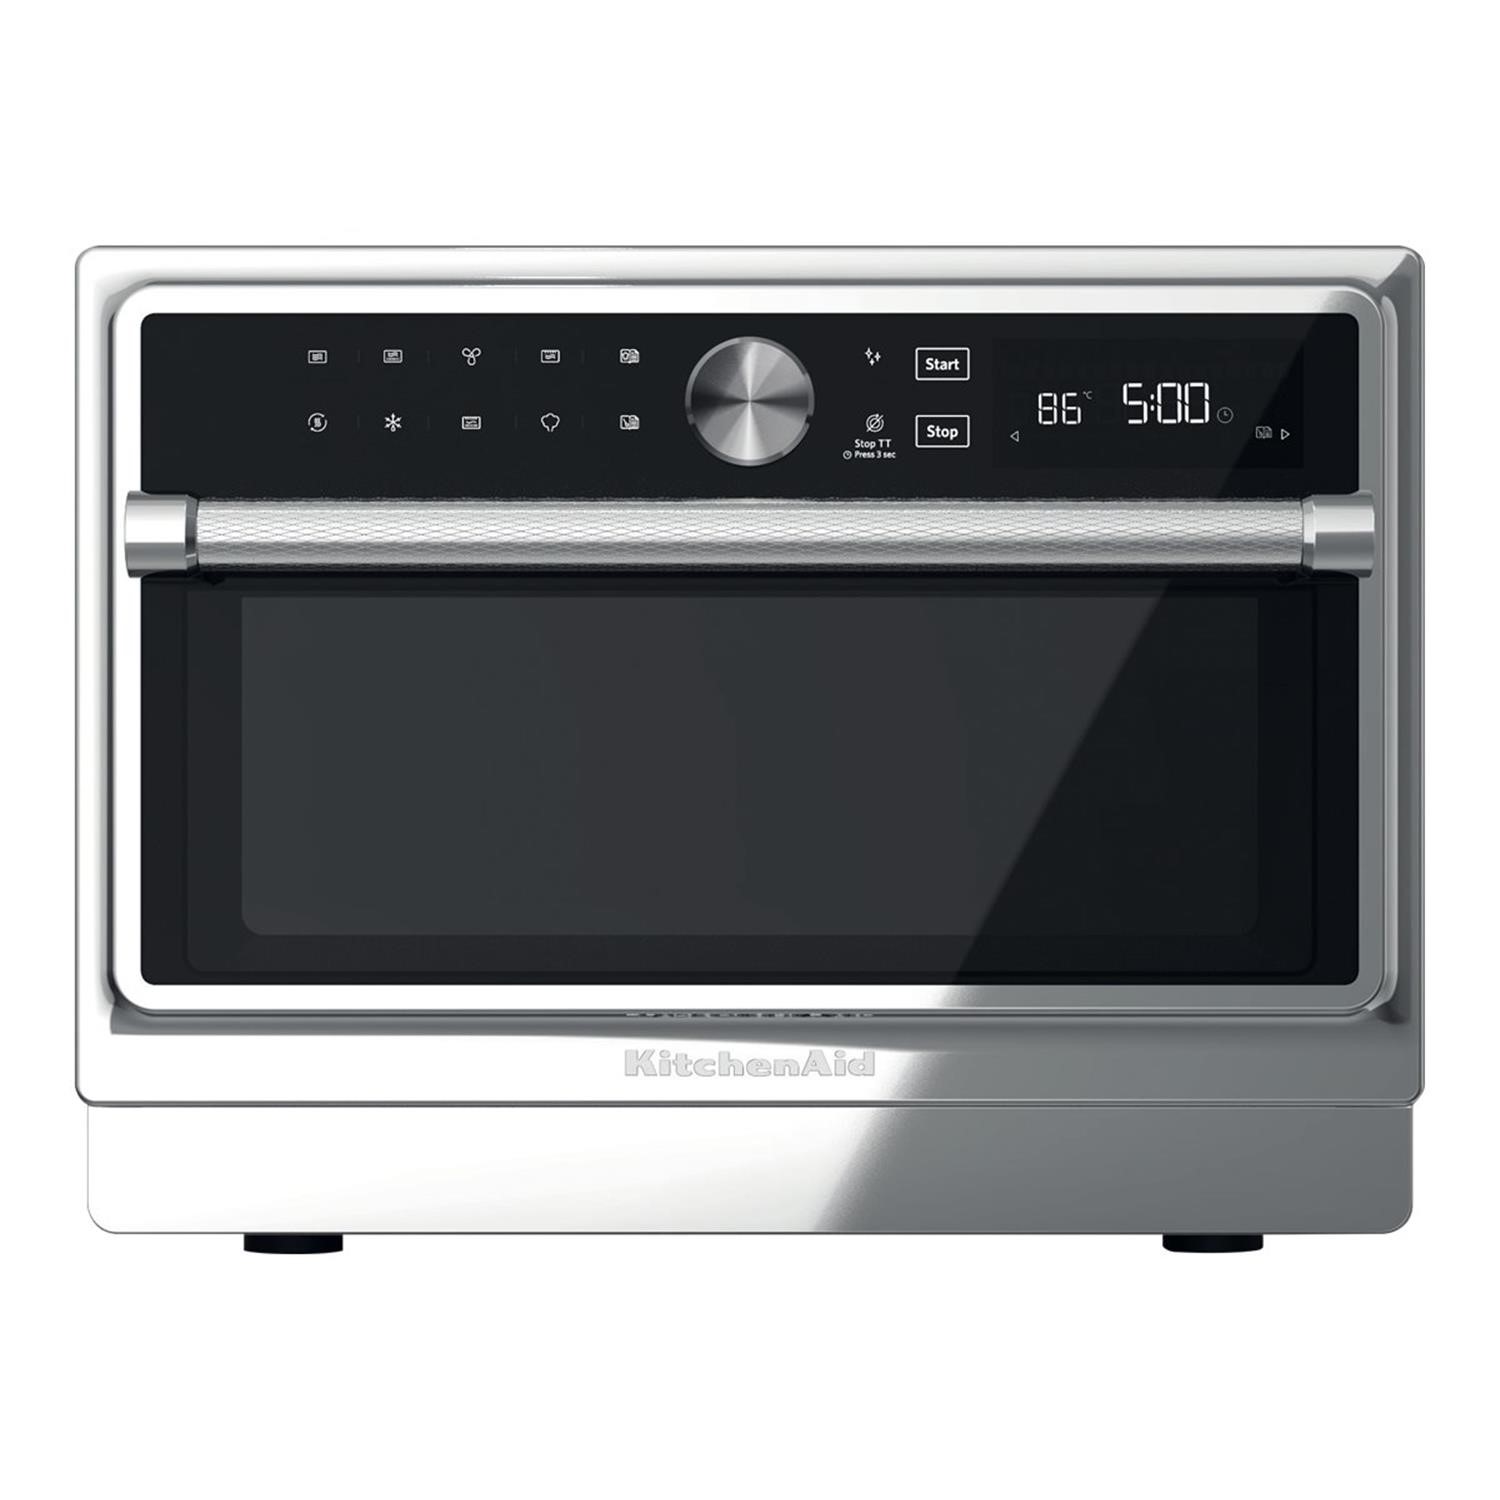 Refurbished KitchenAid KMQFX33910 33L 1000W Freestanding Combination Microwave Oven Stainless Steel